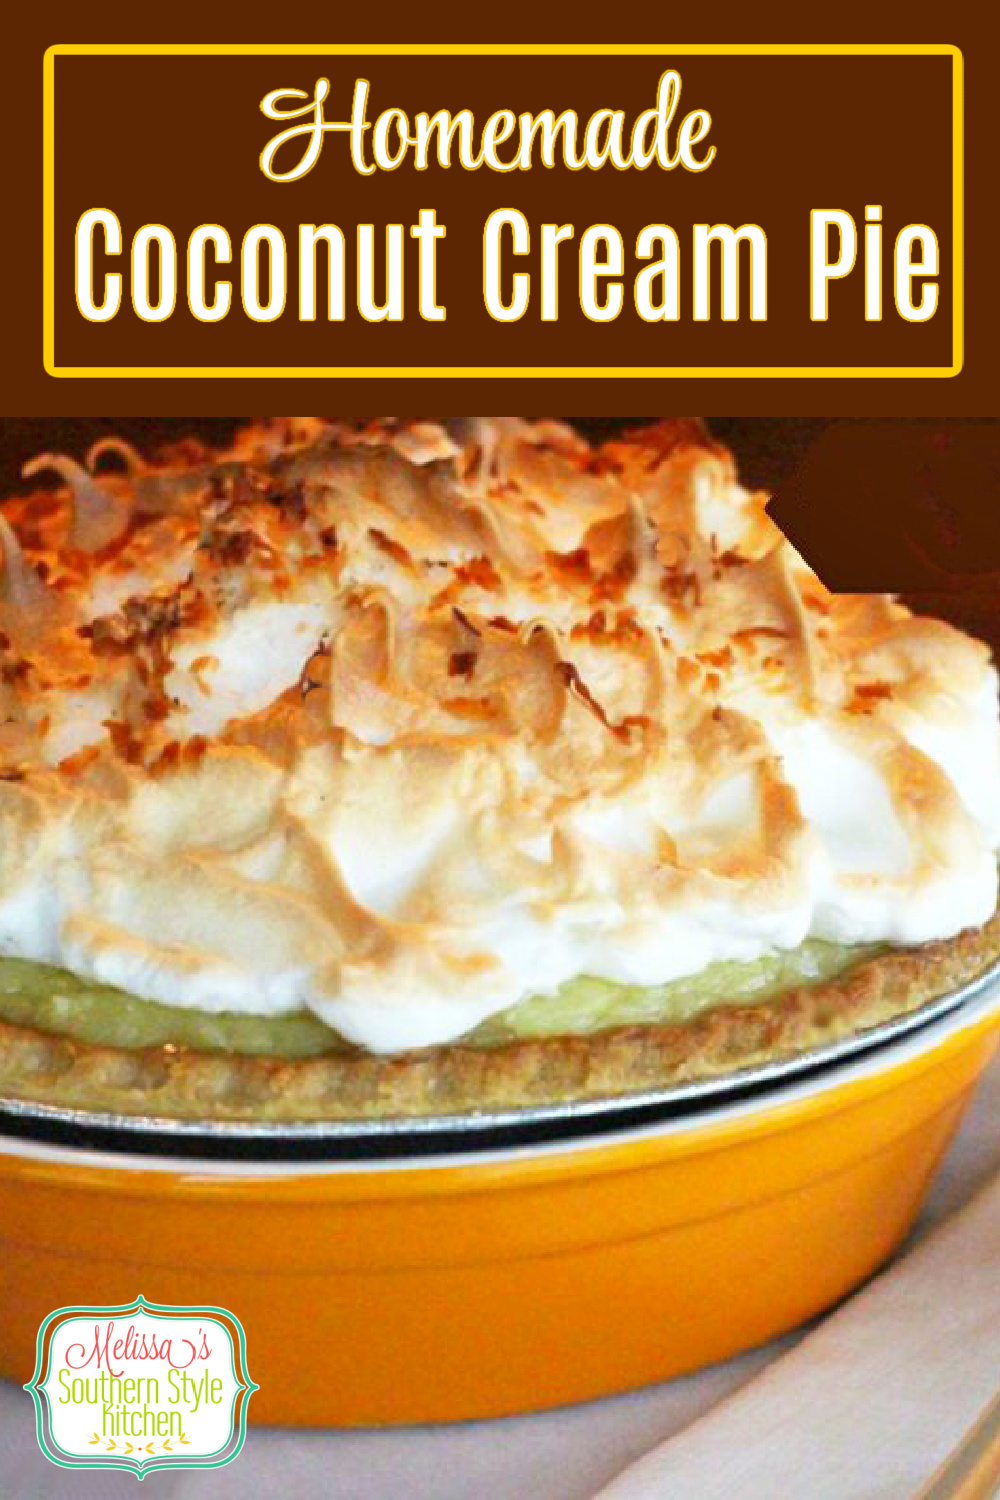 This scratch made Coconut Cream Pie is topped with a fluffy golden mile high meringue for the crowning touch #coconutcream #coconutcreampie #pierecipes #coconutpierecipes #southerndesserts #dessertfoodrecipes